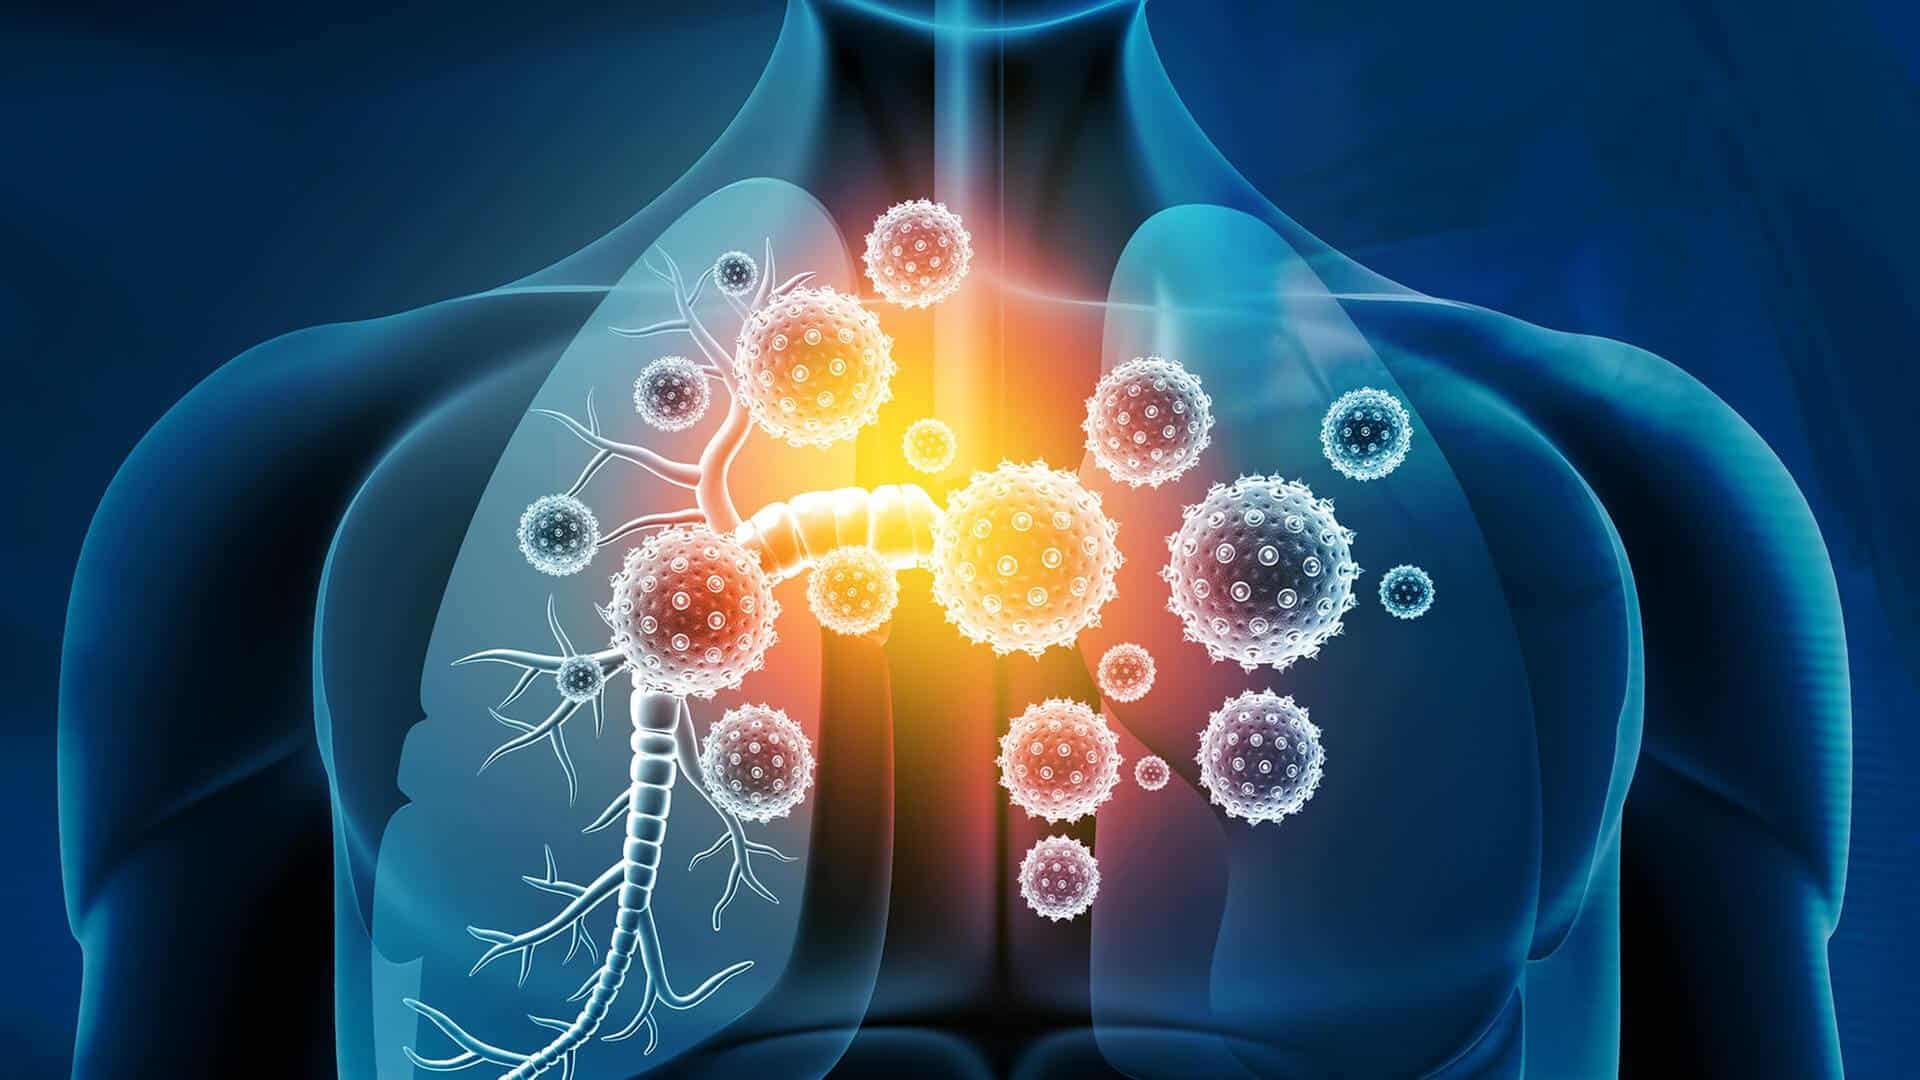 infection trigger your asthma